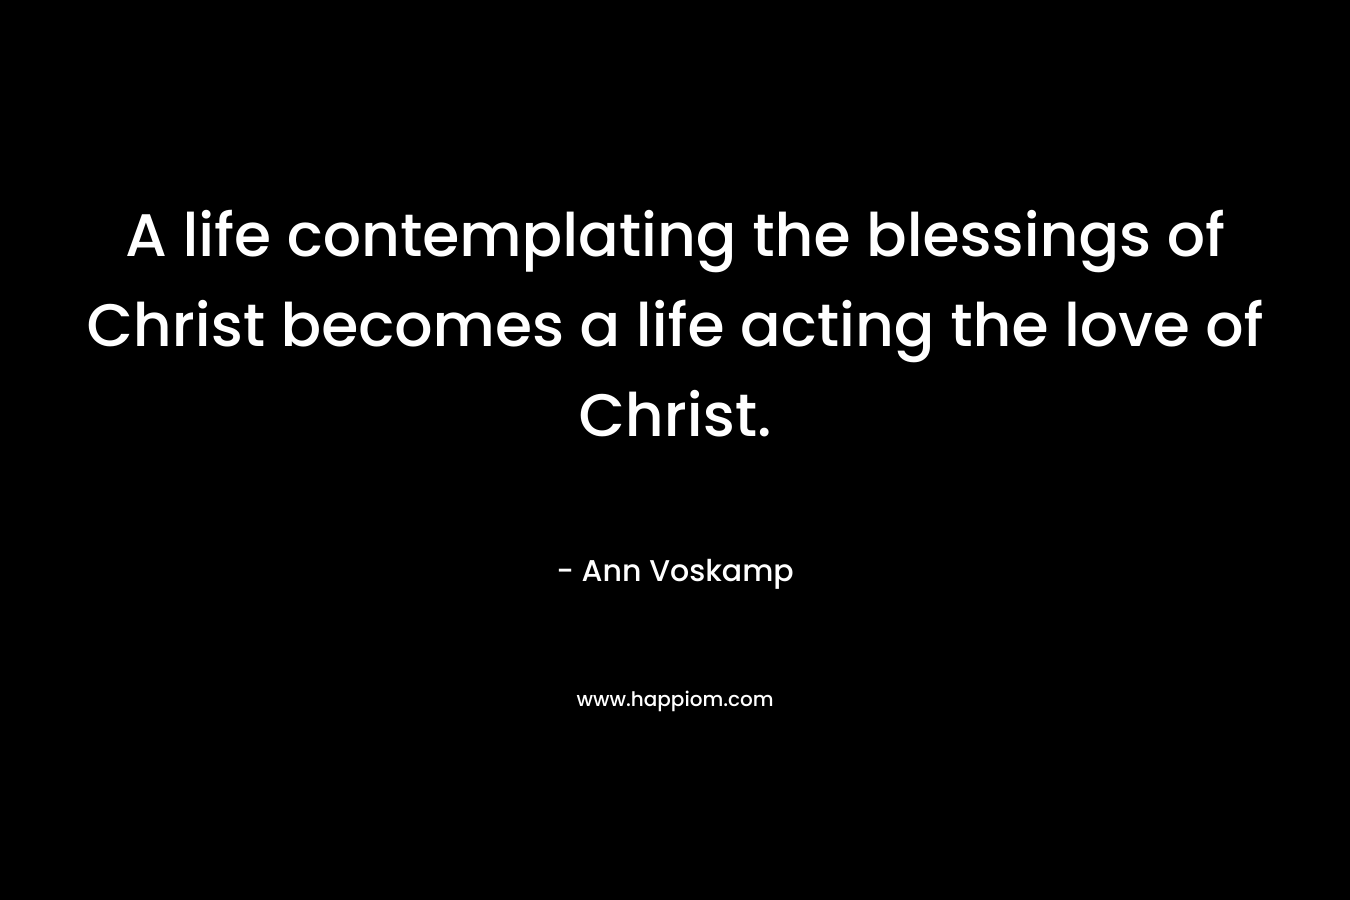 A life contemplating the blessings of Christ becomes a life acting the love of Christ.